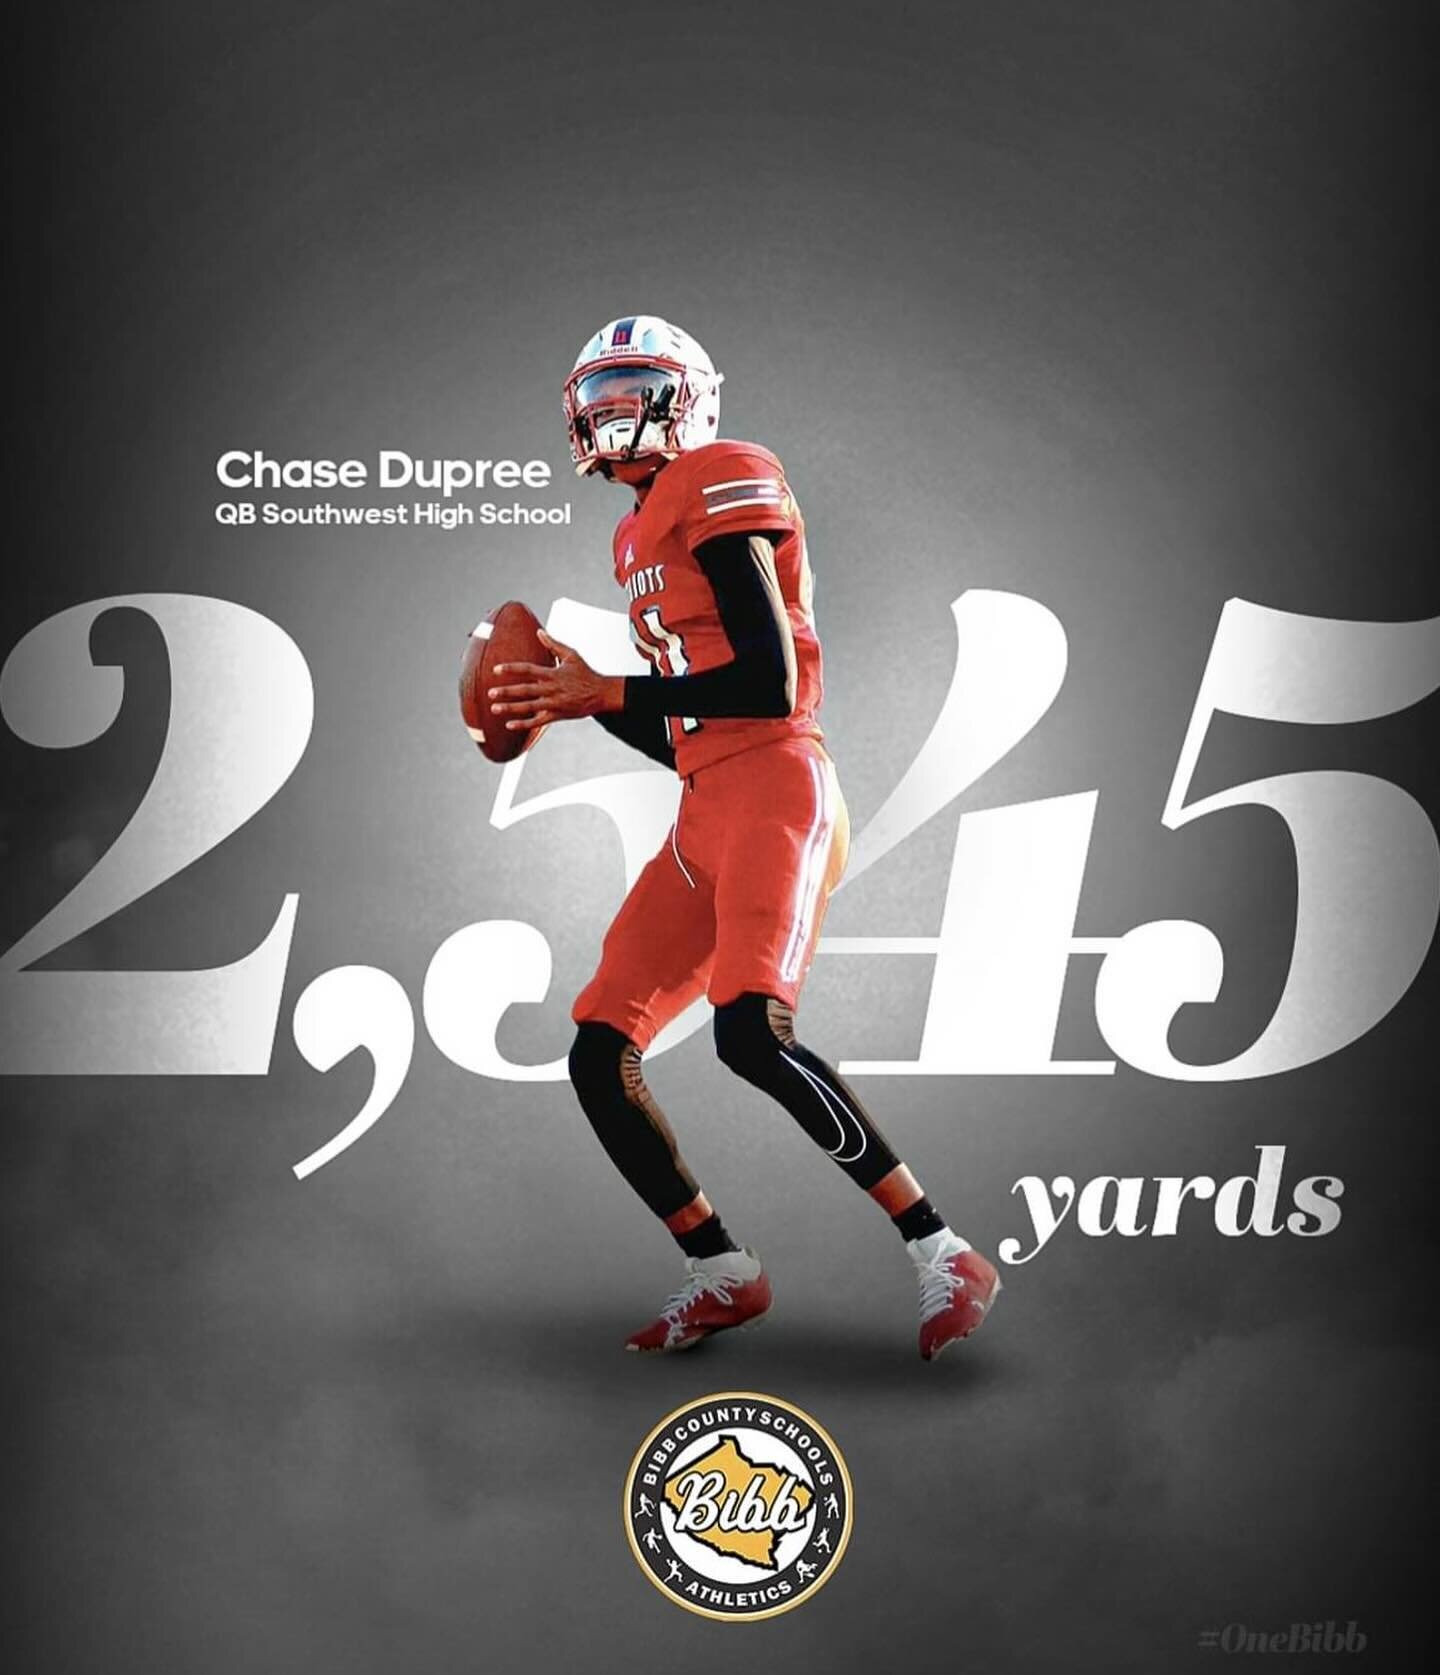 Day 3: Congratulations to Chase Dupree 🐛 🏈 for breaking the football passing record in Bibb County history as a 10th grader! He is a former E-STEAM student during CP&rsquo;s virtual sessions during the pandemic when he was a middle schooler. 

In S